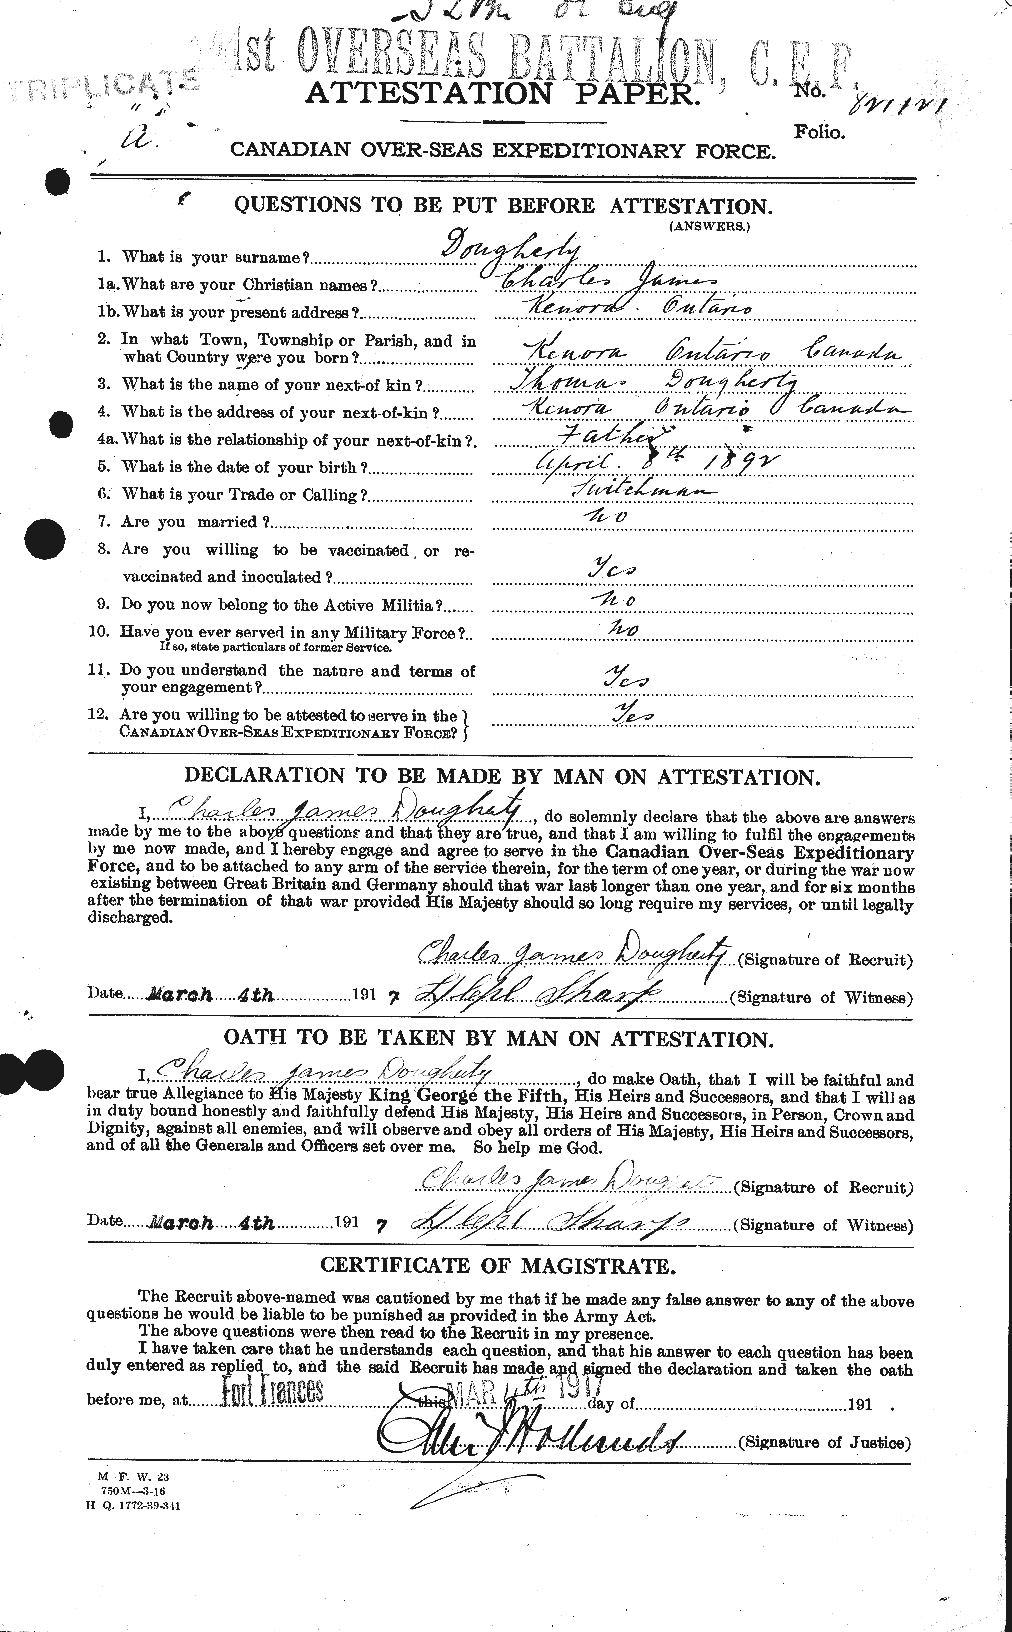 Personnel Records of the First World War - CEF 294254a